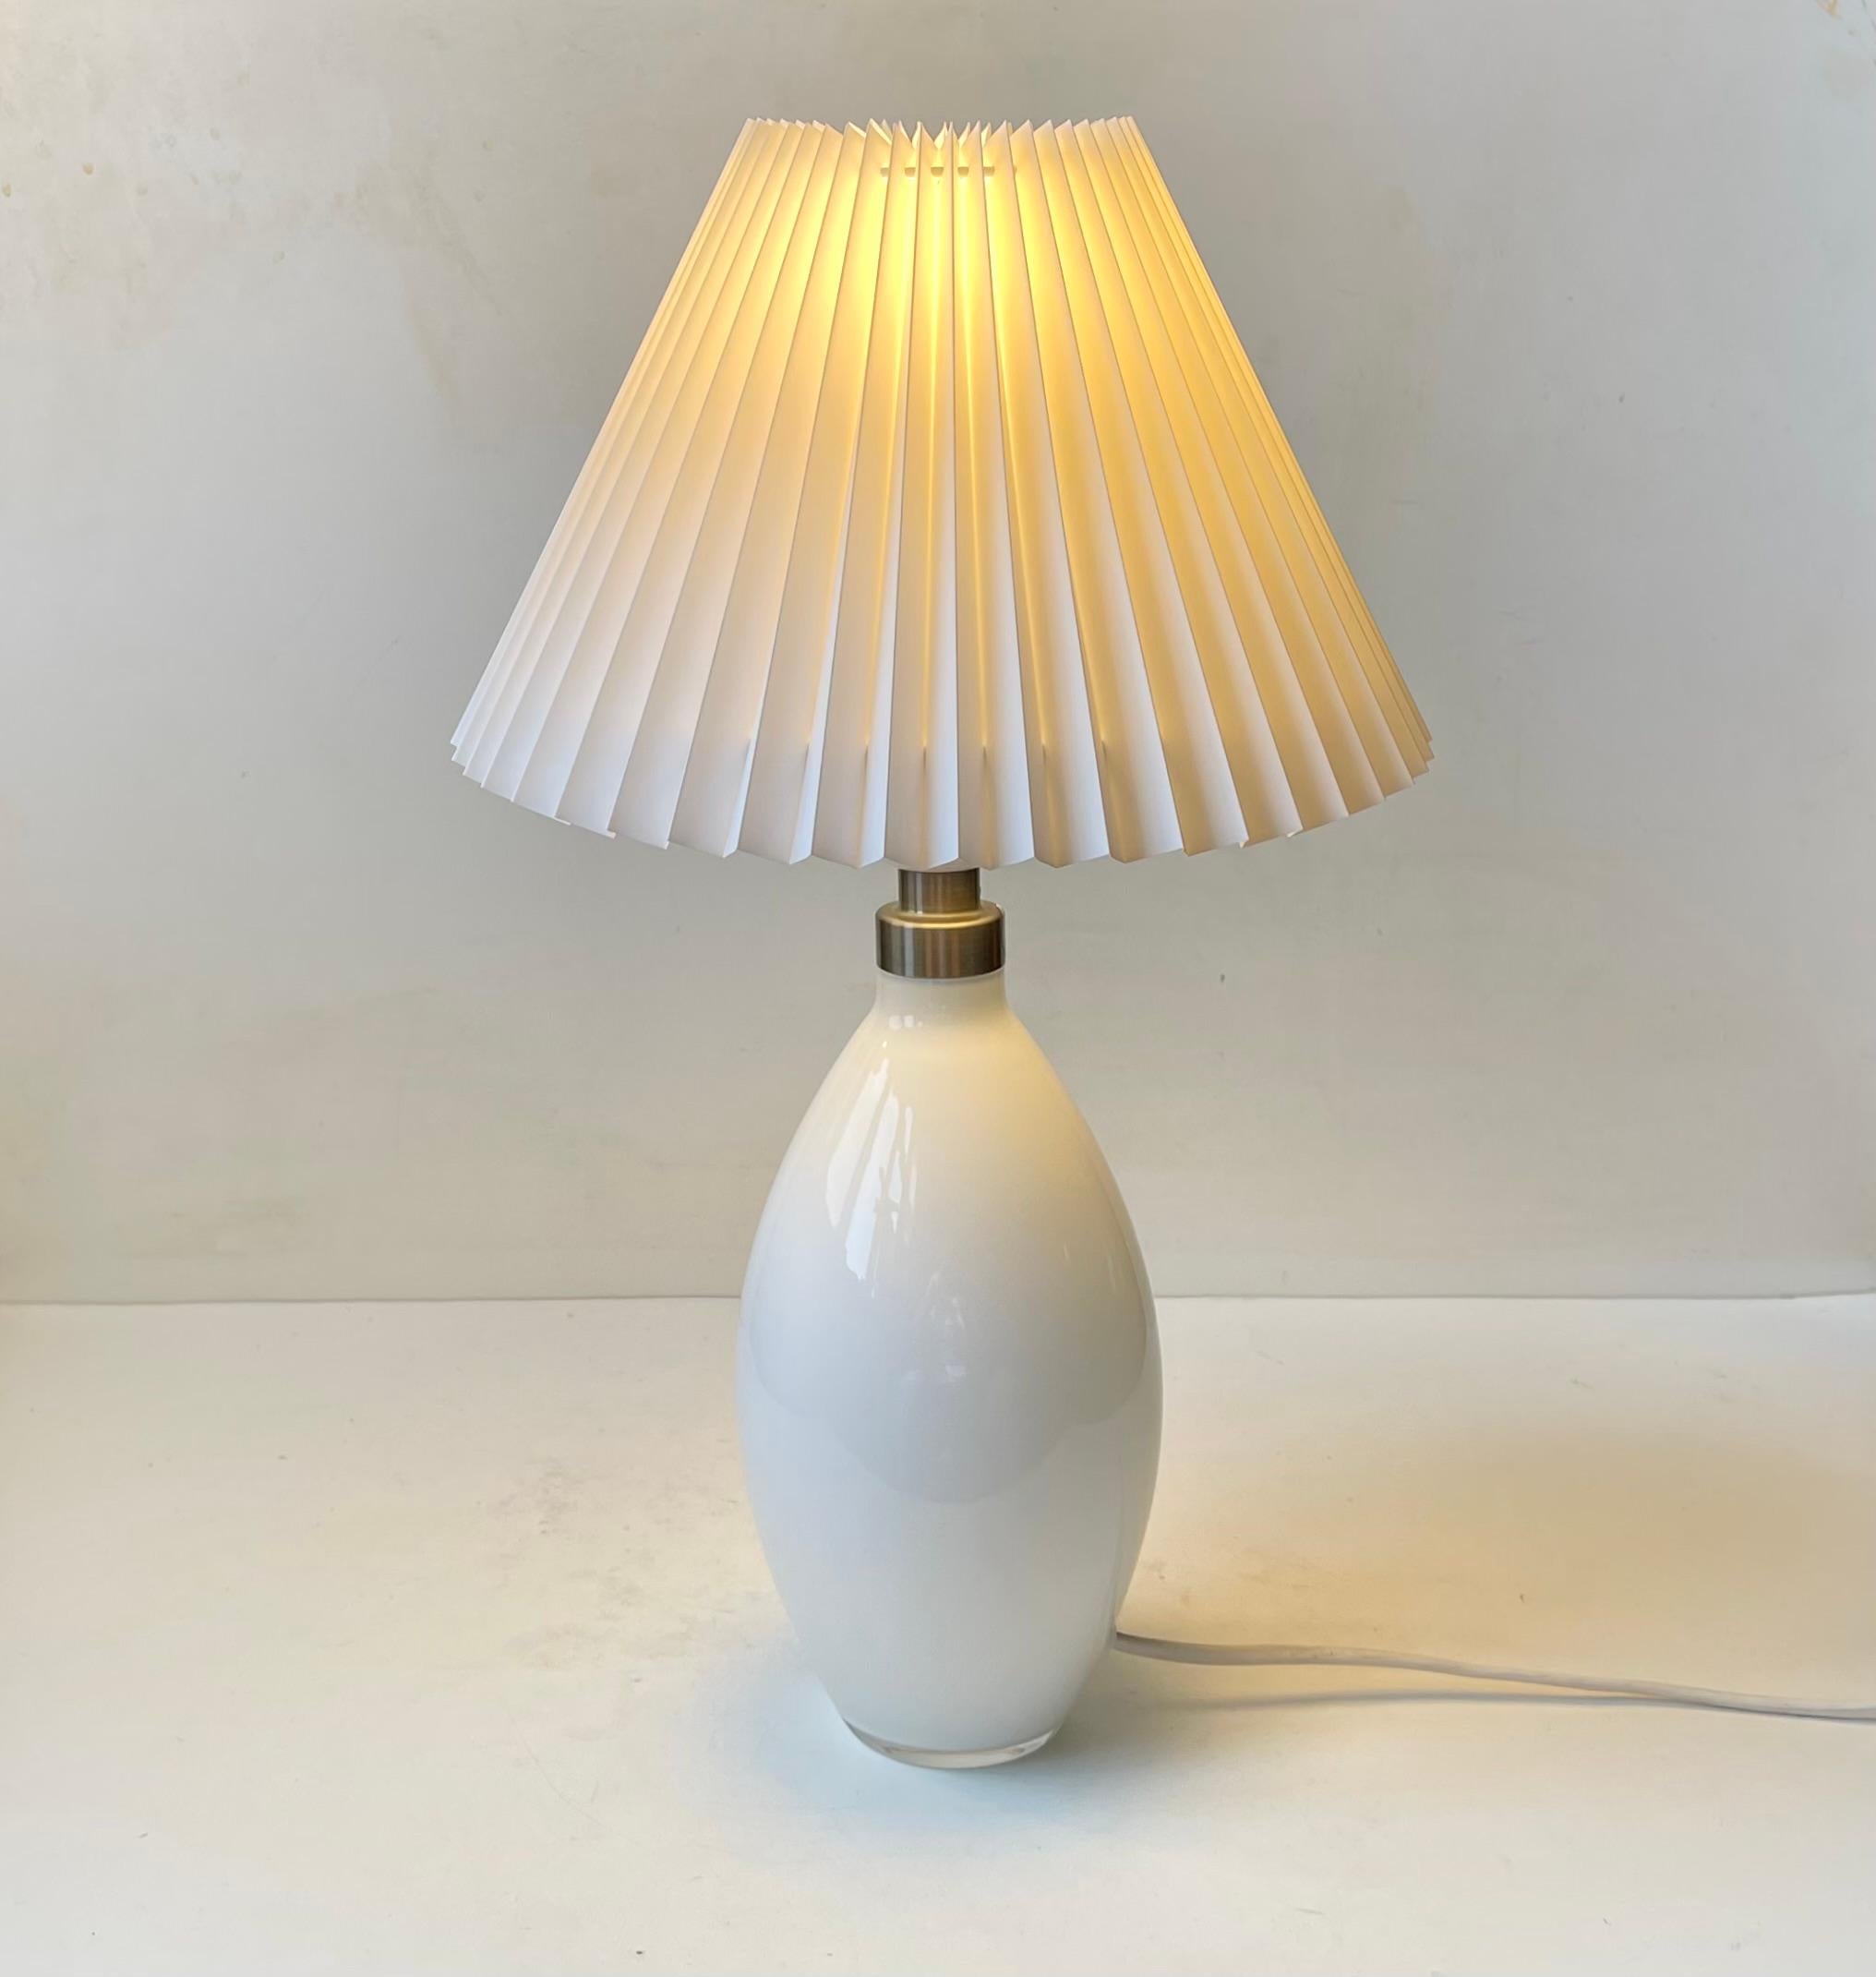 Stylish hand-blown table lamp in white opaline glass. Designed by Peter Svarrer and manufactured by Holmegaard in Denmark during 1990s or early 2000s. It comes with a new fluted white Danish shade. Measurements: H: 44 cm, Diameter: 27 cm (shade). 